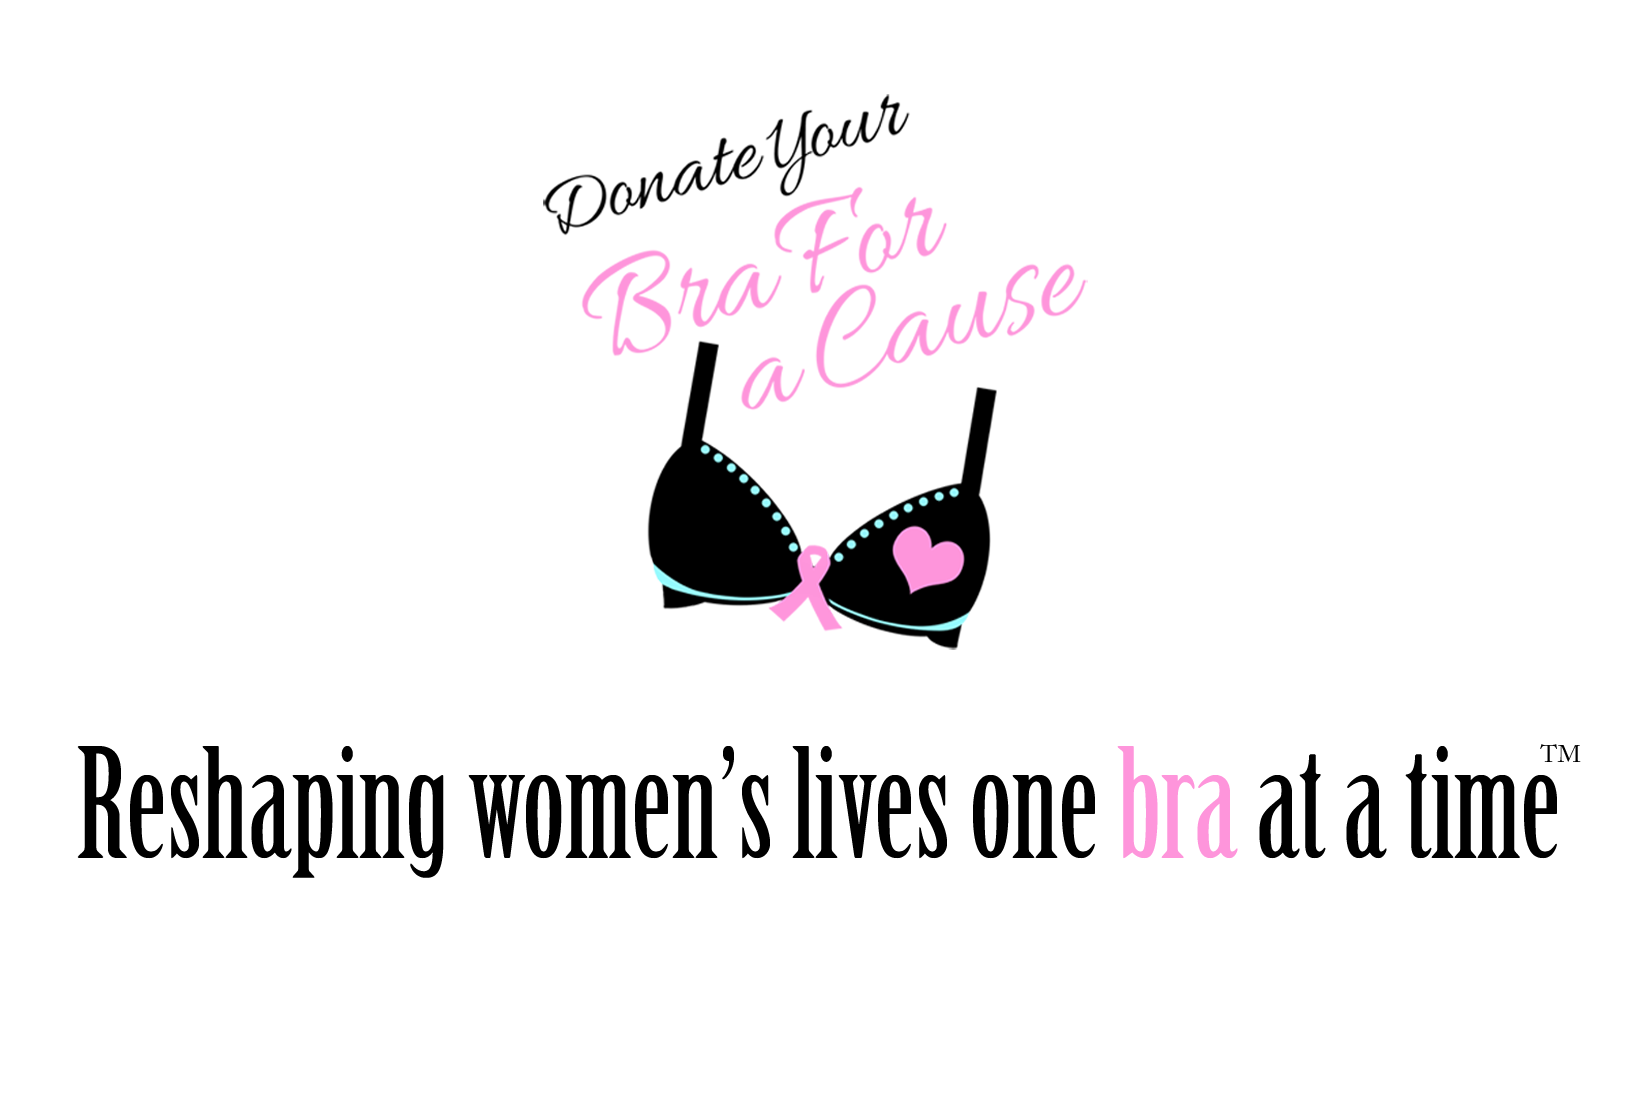 BRA's For a Cause